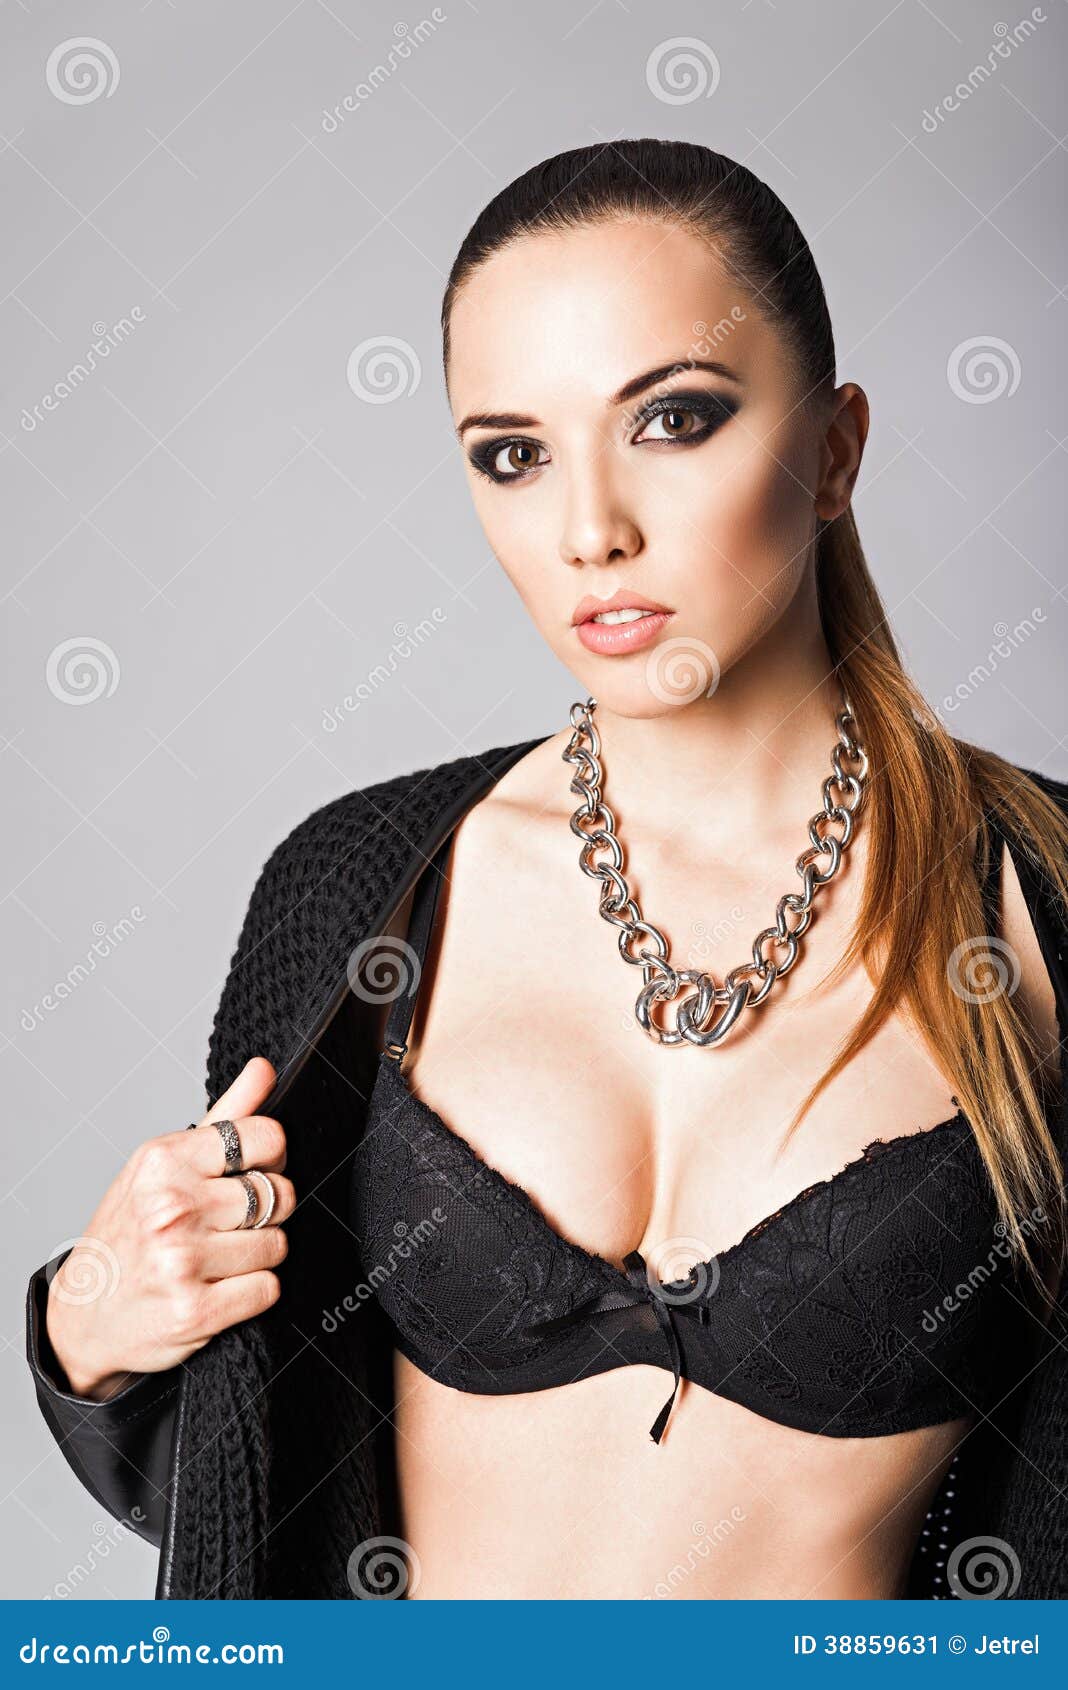 Black preteen girl in lingerie Pretty Young Girl Wearing Black Jacket And Bra Stock Image Image Of Pretty Beauty 38859631